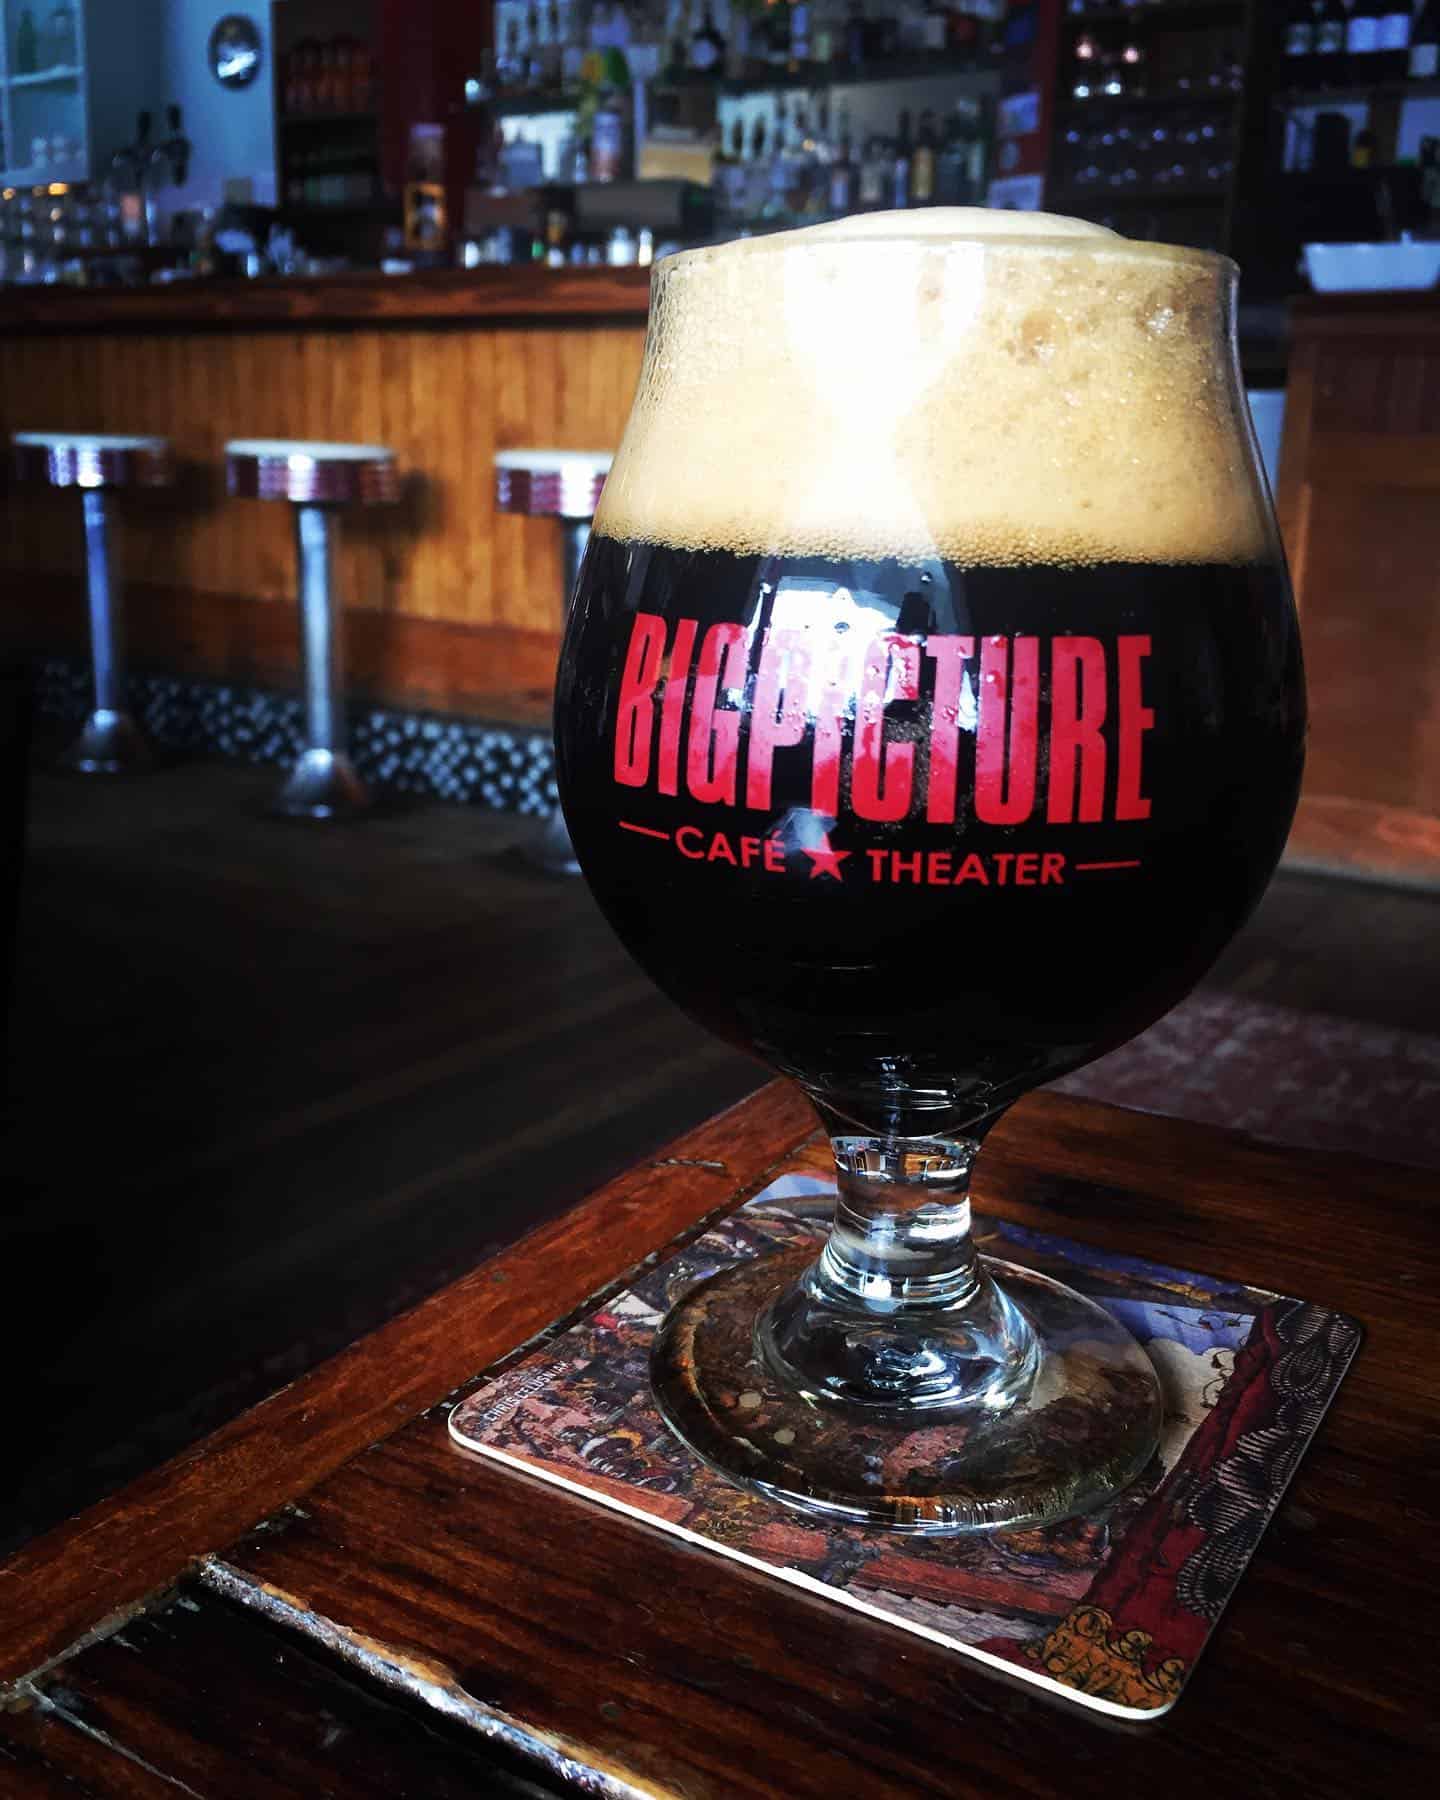 Big Picture Theater & Cafe - Beer on Tap